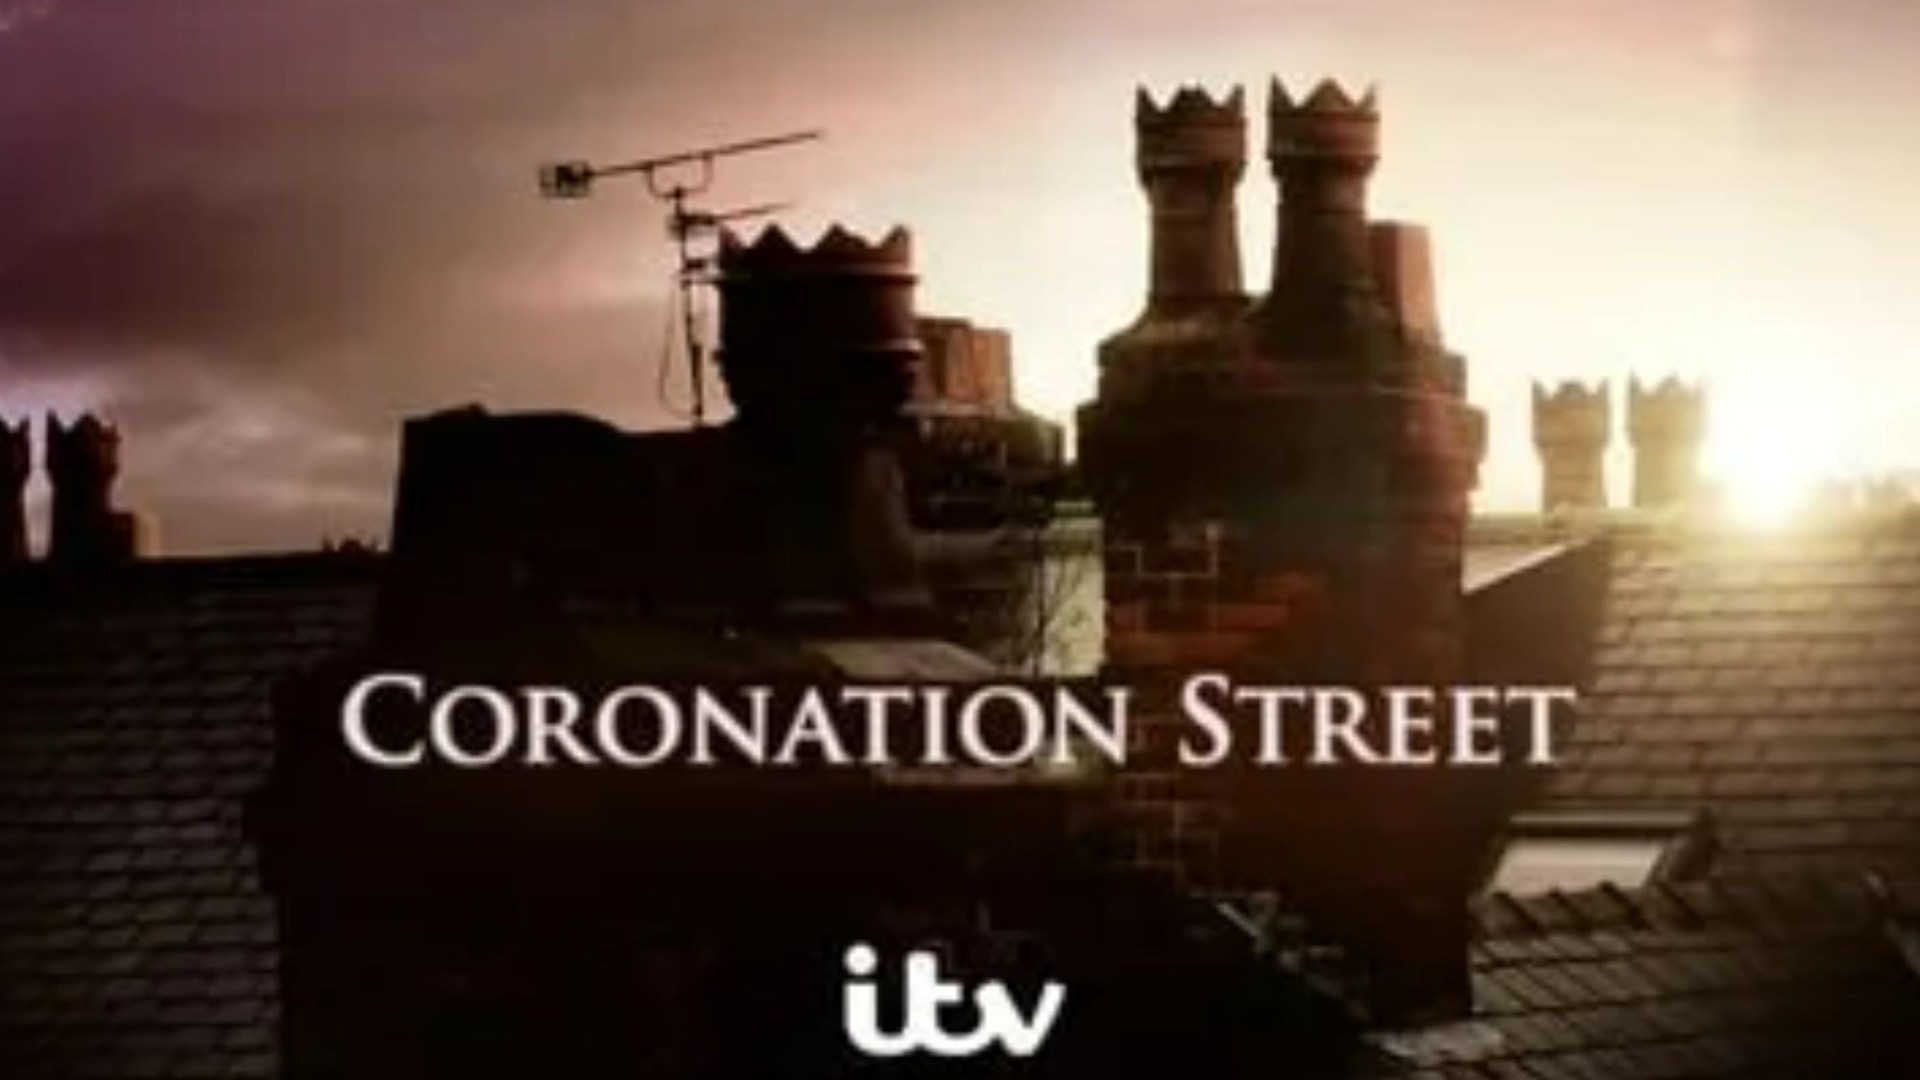 Coronation Street Fans Furious as Soap ‘Disappears’: Ruined Friday Night Rant Unleashed